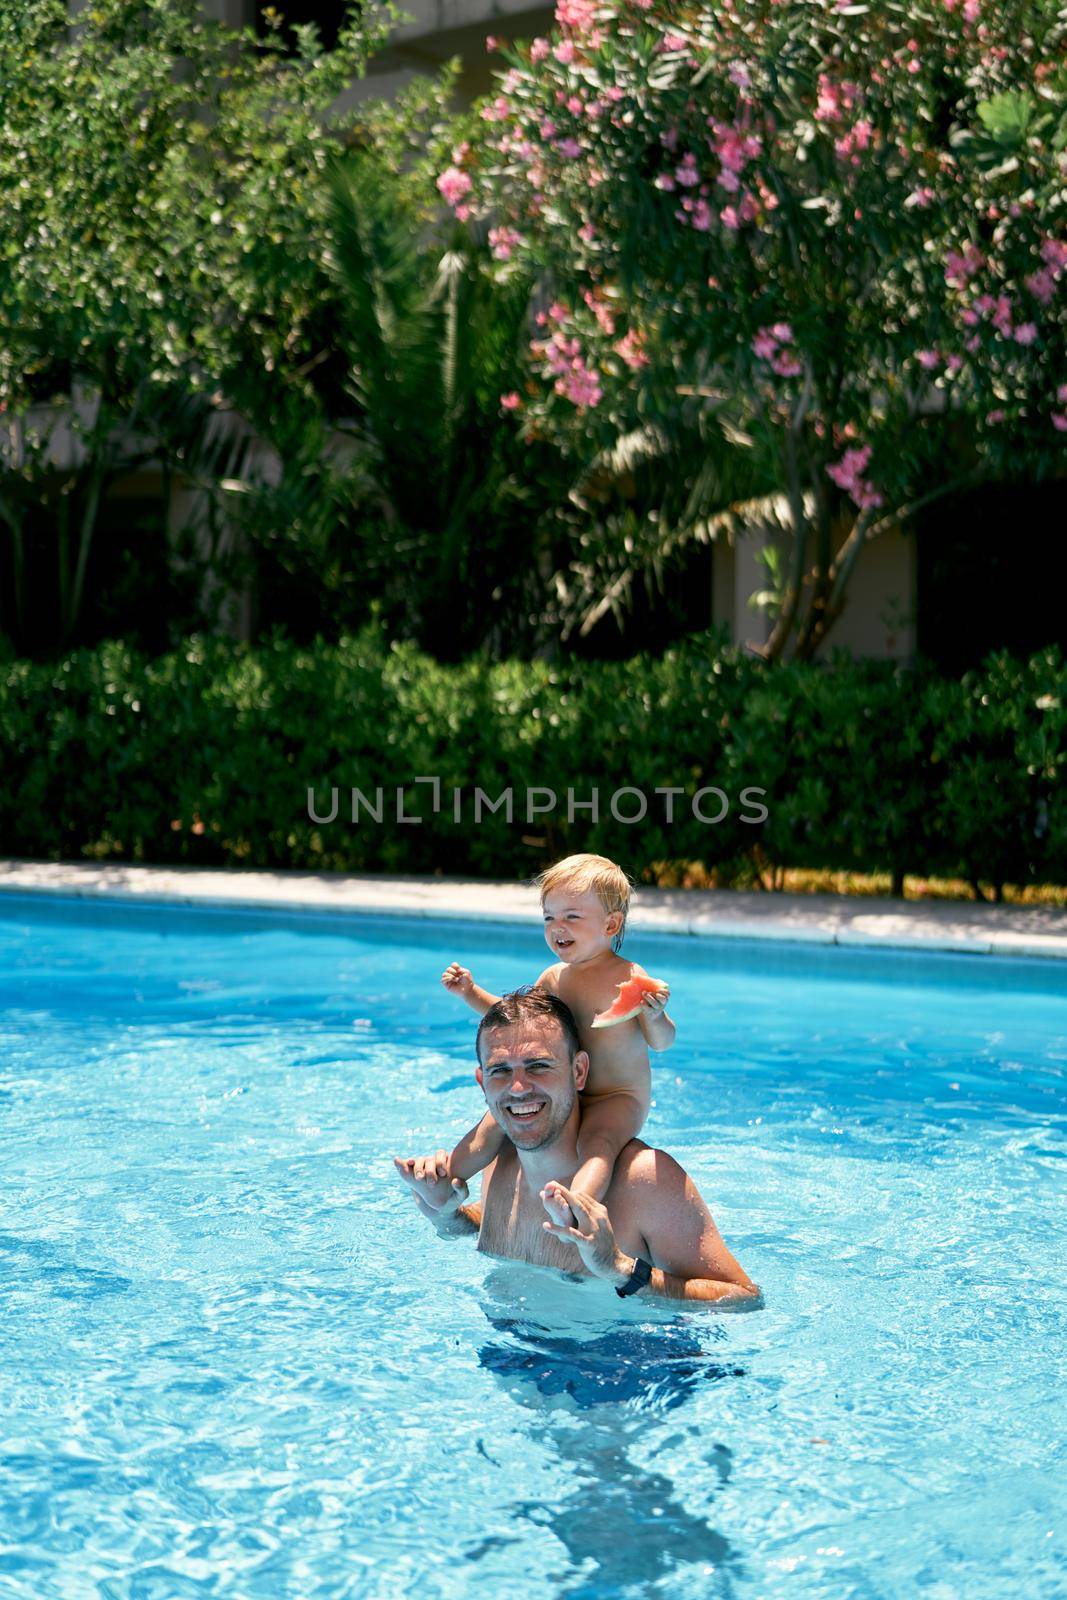 Smiling dad standing in the pool with a small child on his shoulders. High quality photo